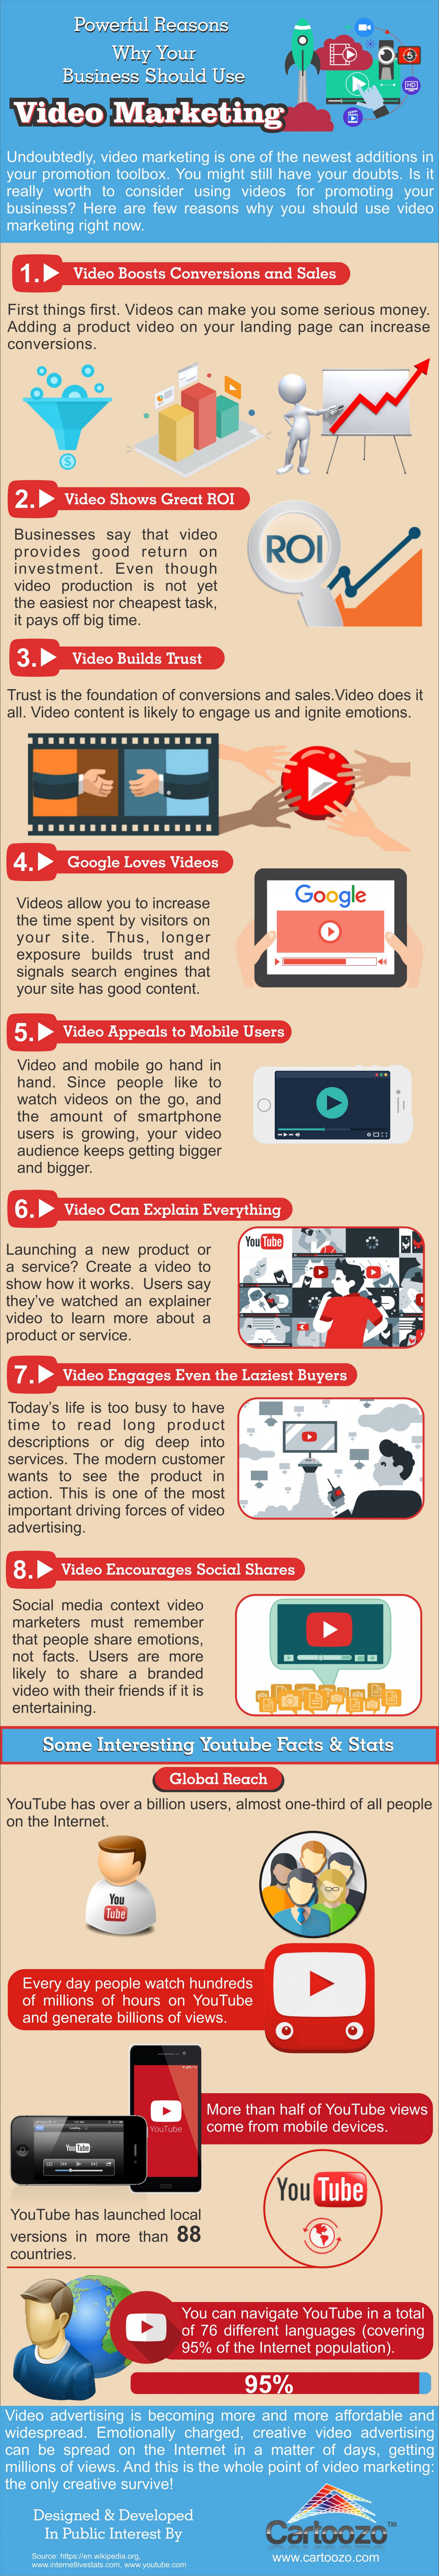 Powerful Reasons Why Your Business Should Use Video Marketing Infographic